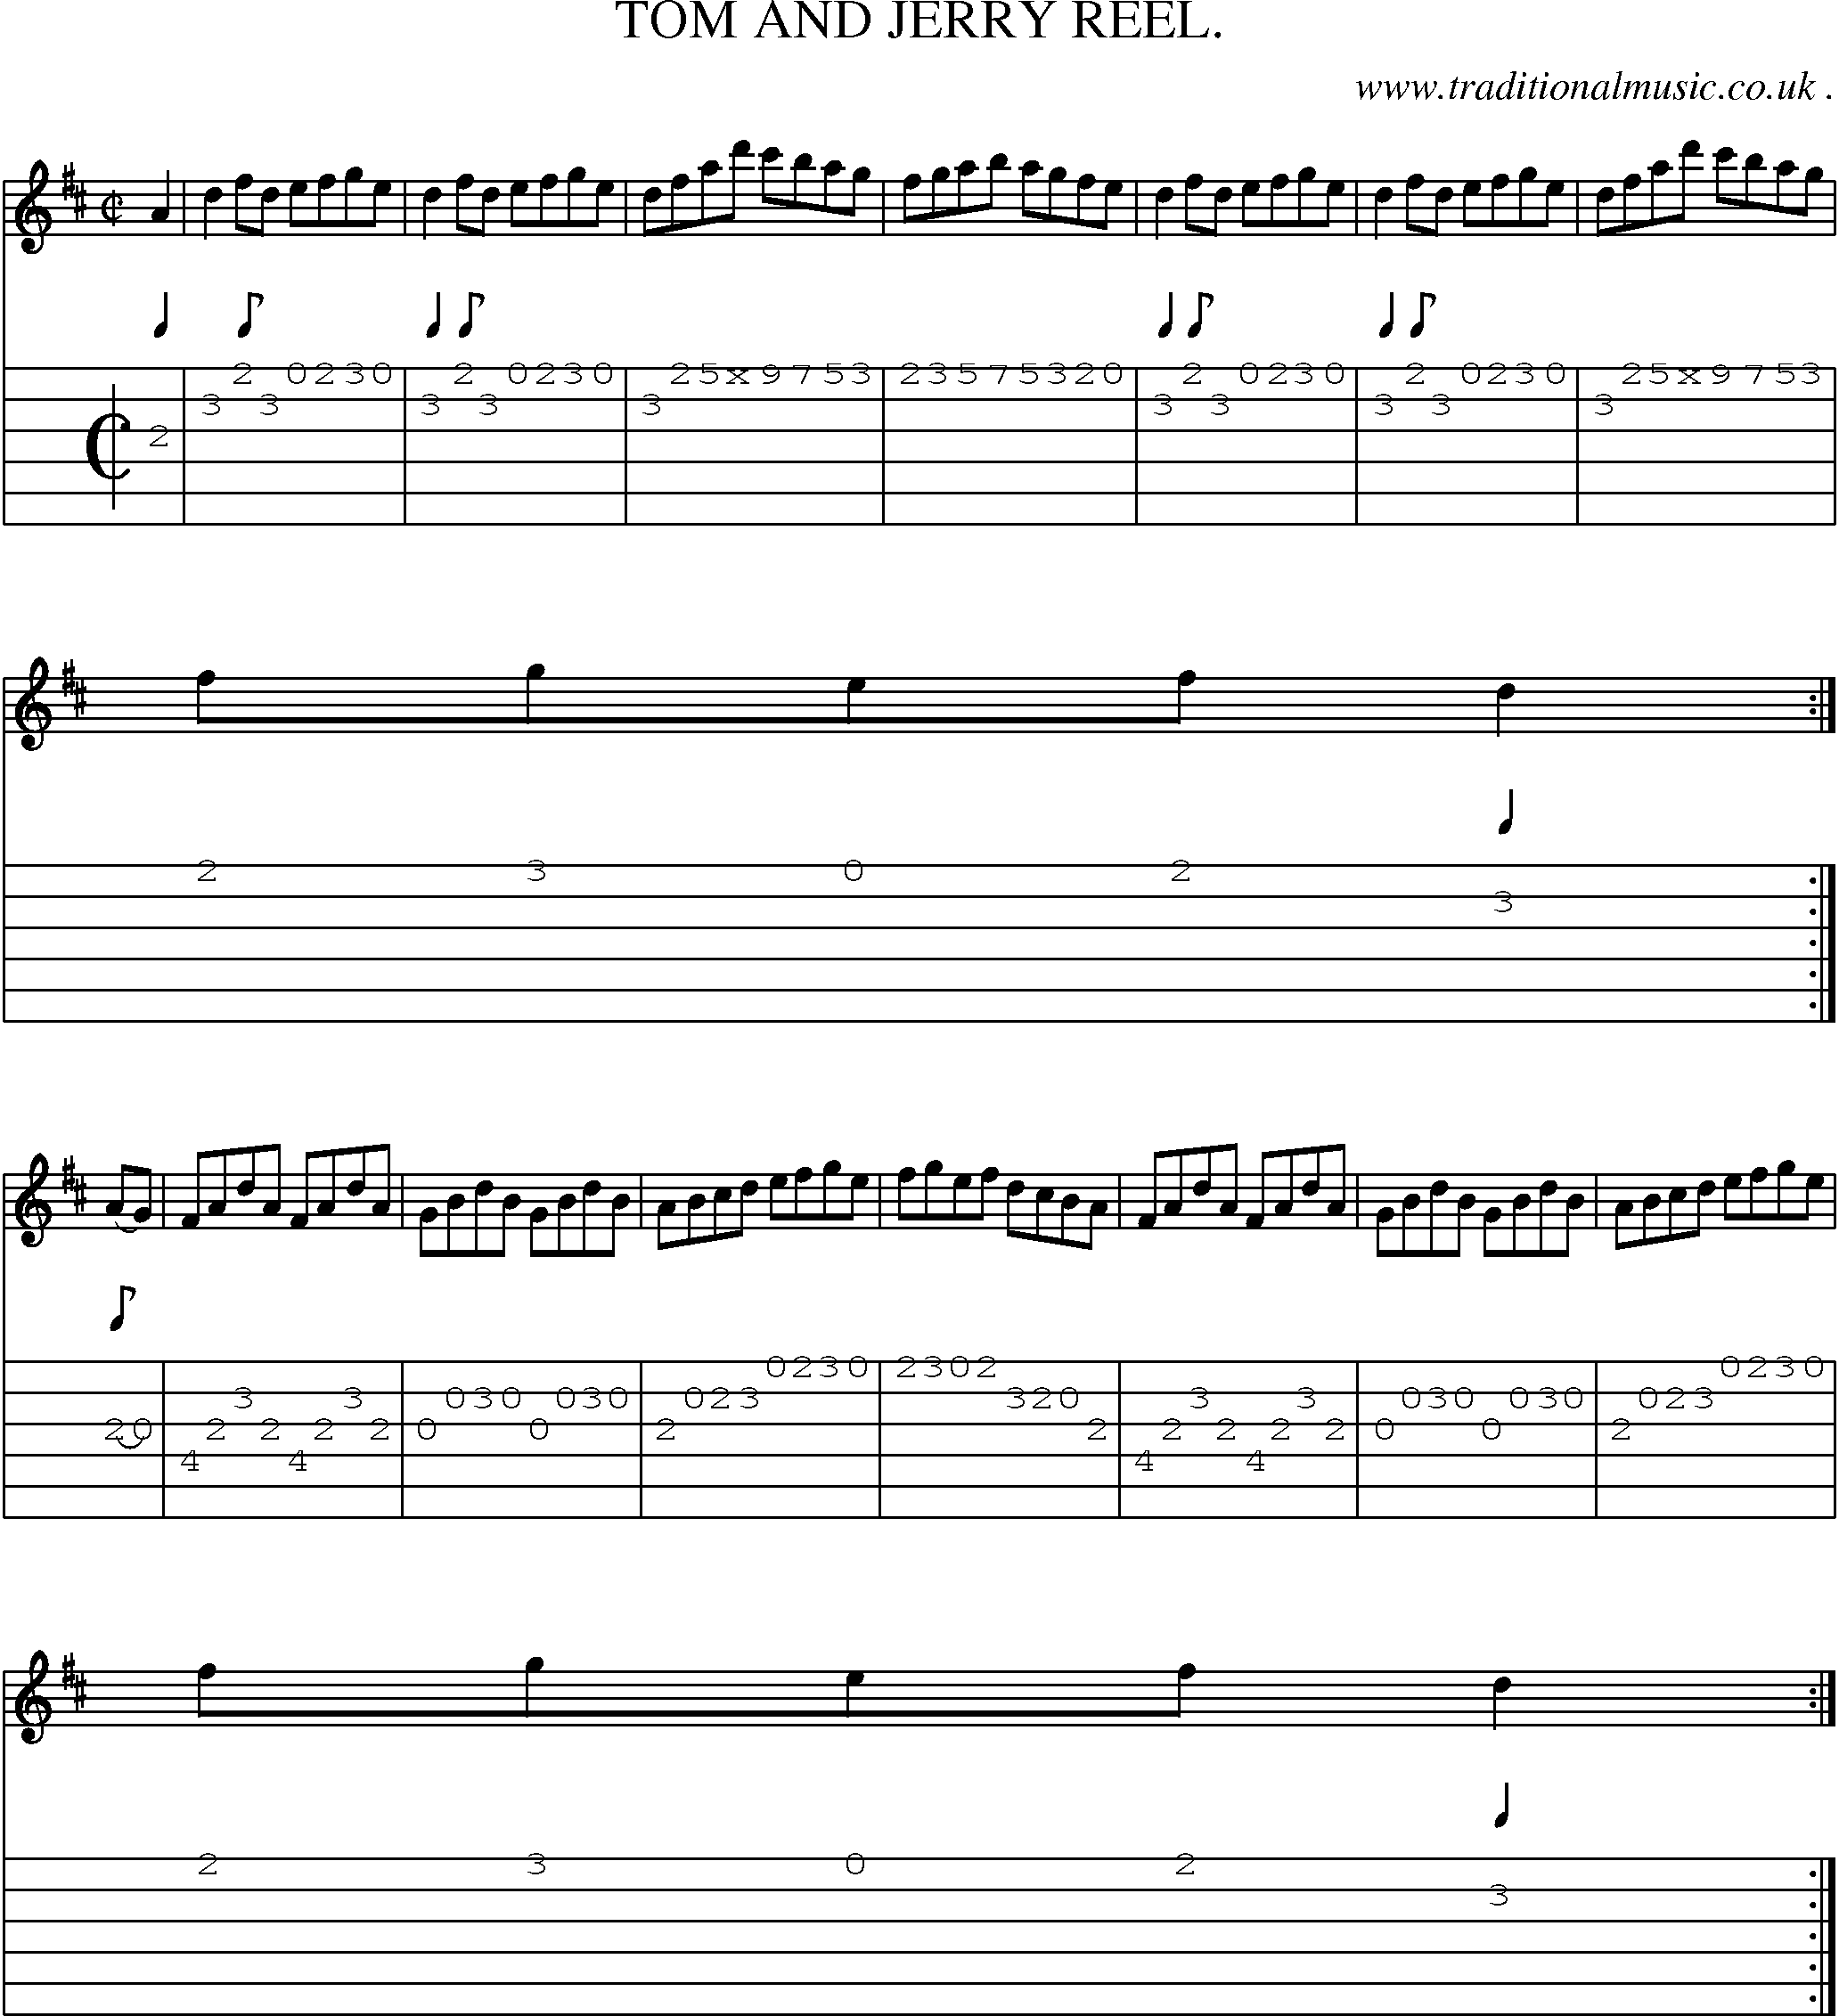 Sheet-Music and Guitar Tabs for Tom And Jerry Reel